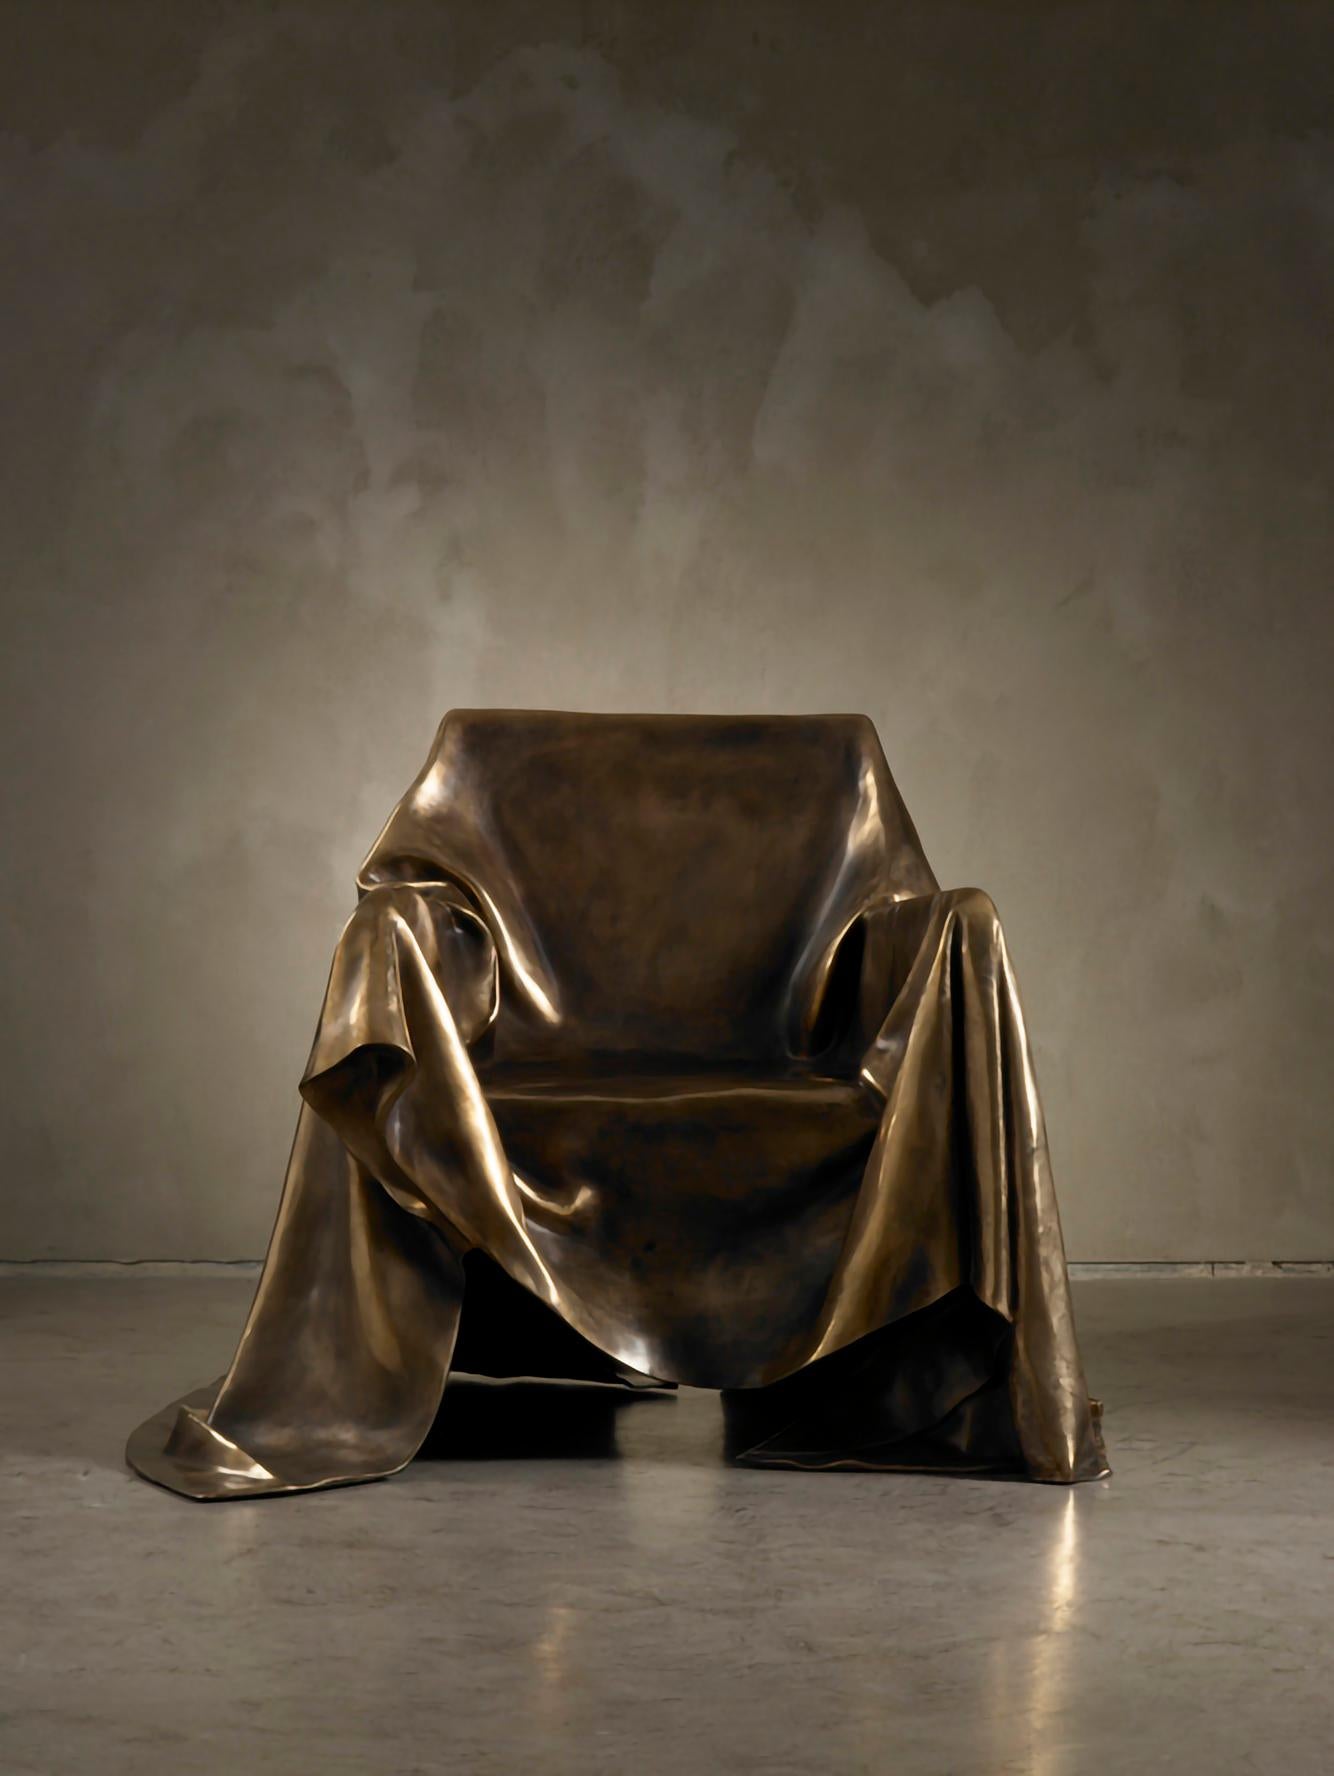 Extraordinary armchair in a limited edition of 9 pieces made in lost wax-casting in bronze for Dilmos Milano. The artist Andrea Salvetti was inspired by the posture of the Madonna holding Christ in the famous Pietà sculpture of Michelangelo in Rome.